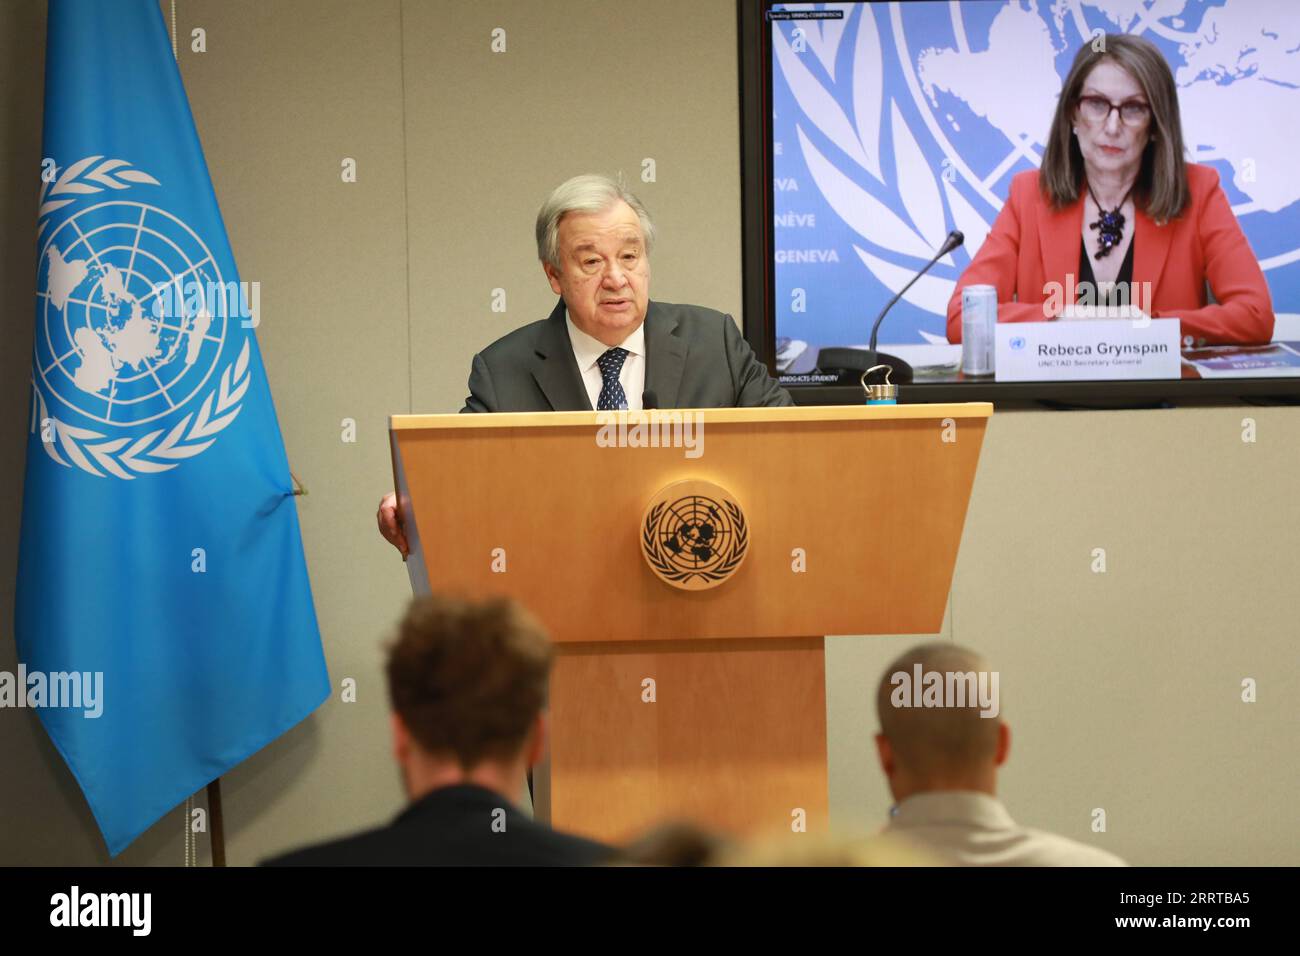 230712 -- UNITED NATIONS, July 12, 2023 -- UN Secretary-General Antonio Guterres at the podium speaks at the launch of a new report by the UN Global Crisis Response Group entitled A World of Debt at the UN headquarters in New York, on July 12, 2023. An unfolding debt crisis underscores the need for urgent action to reform the global financial system, Guterres said on Wednesday.  UN-GUTERRES-REPORT-A WORLD OF DEBT-LAUNCH XiexE PUBLICATIONxNOTxINxCHN Stock Photo